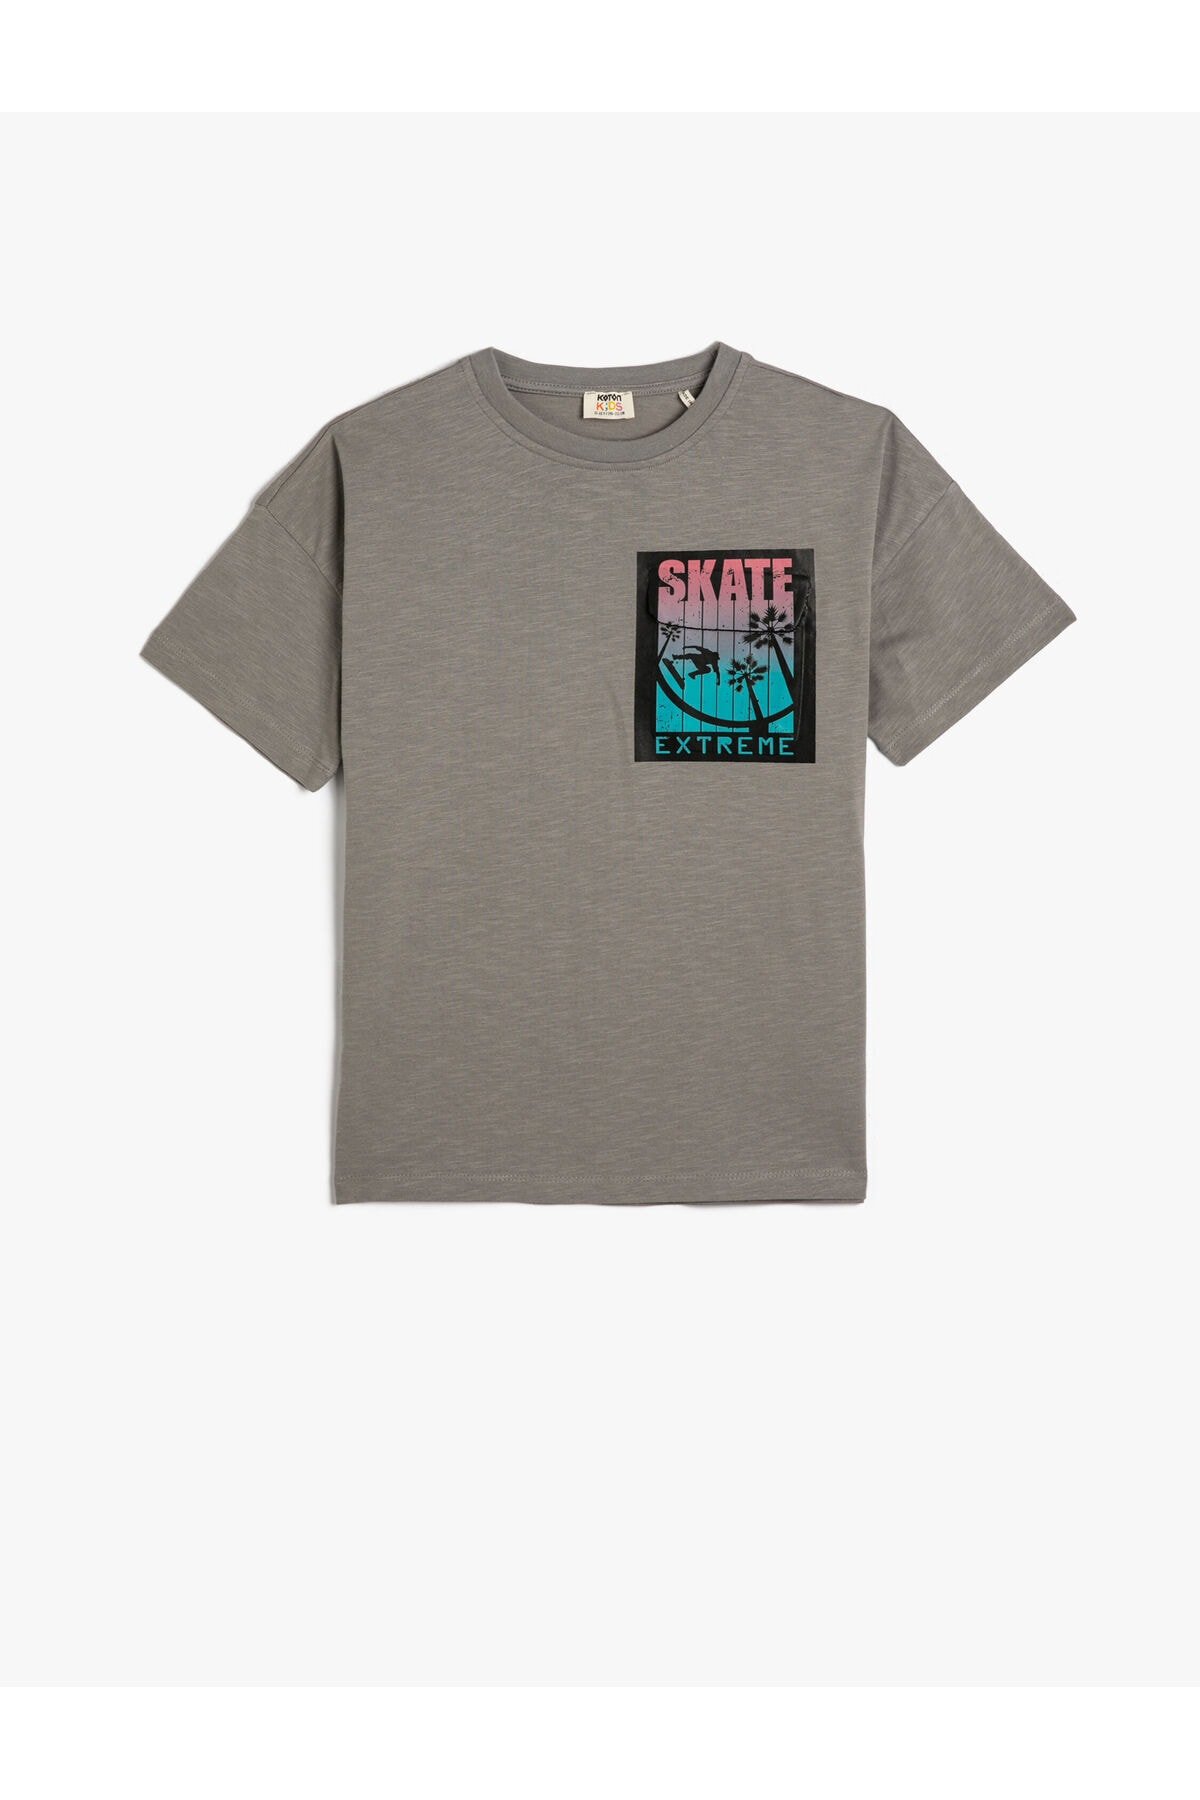 Koton Short-Sleeved T-Shirt with a Printed Cap and Pocket Detail Crew Neck Cotton.